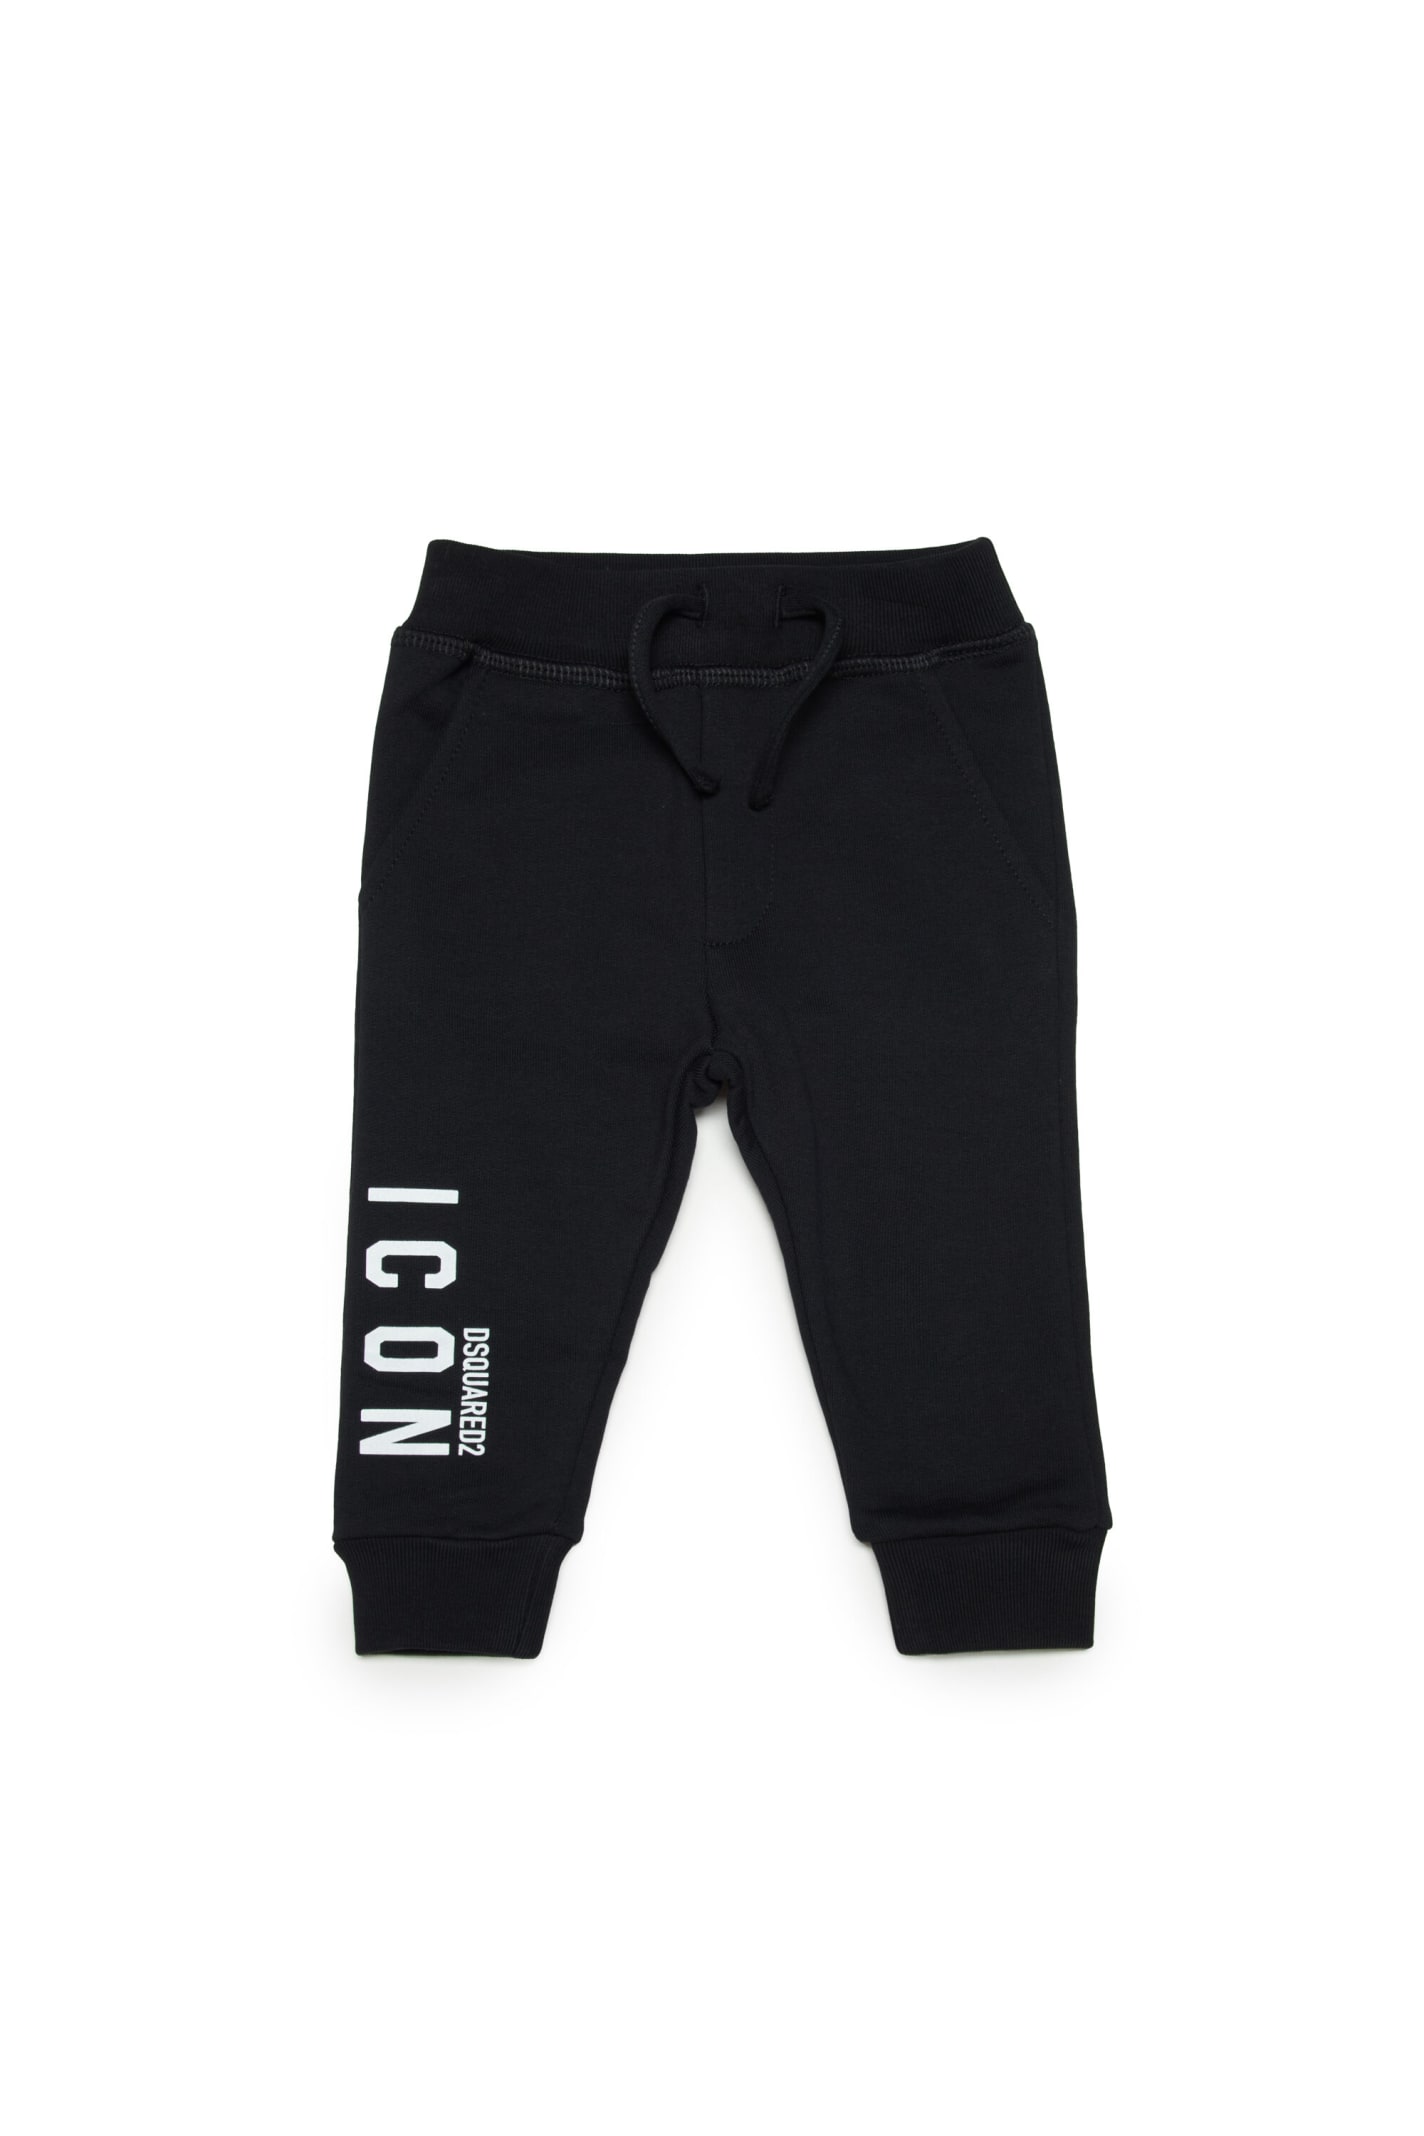 DSQUARED2 D2P606B-ICON TROUSERS DSQUARED BLACK COTTON PANTS WITH ICON LOGO